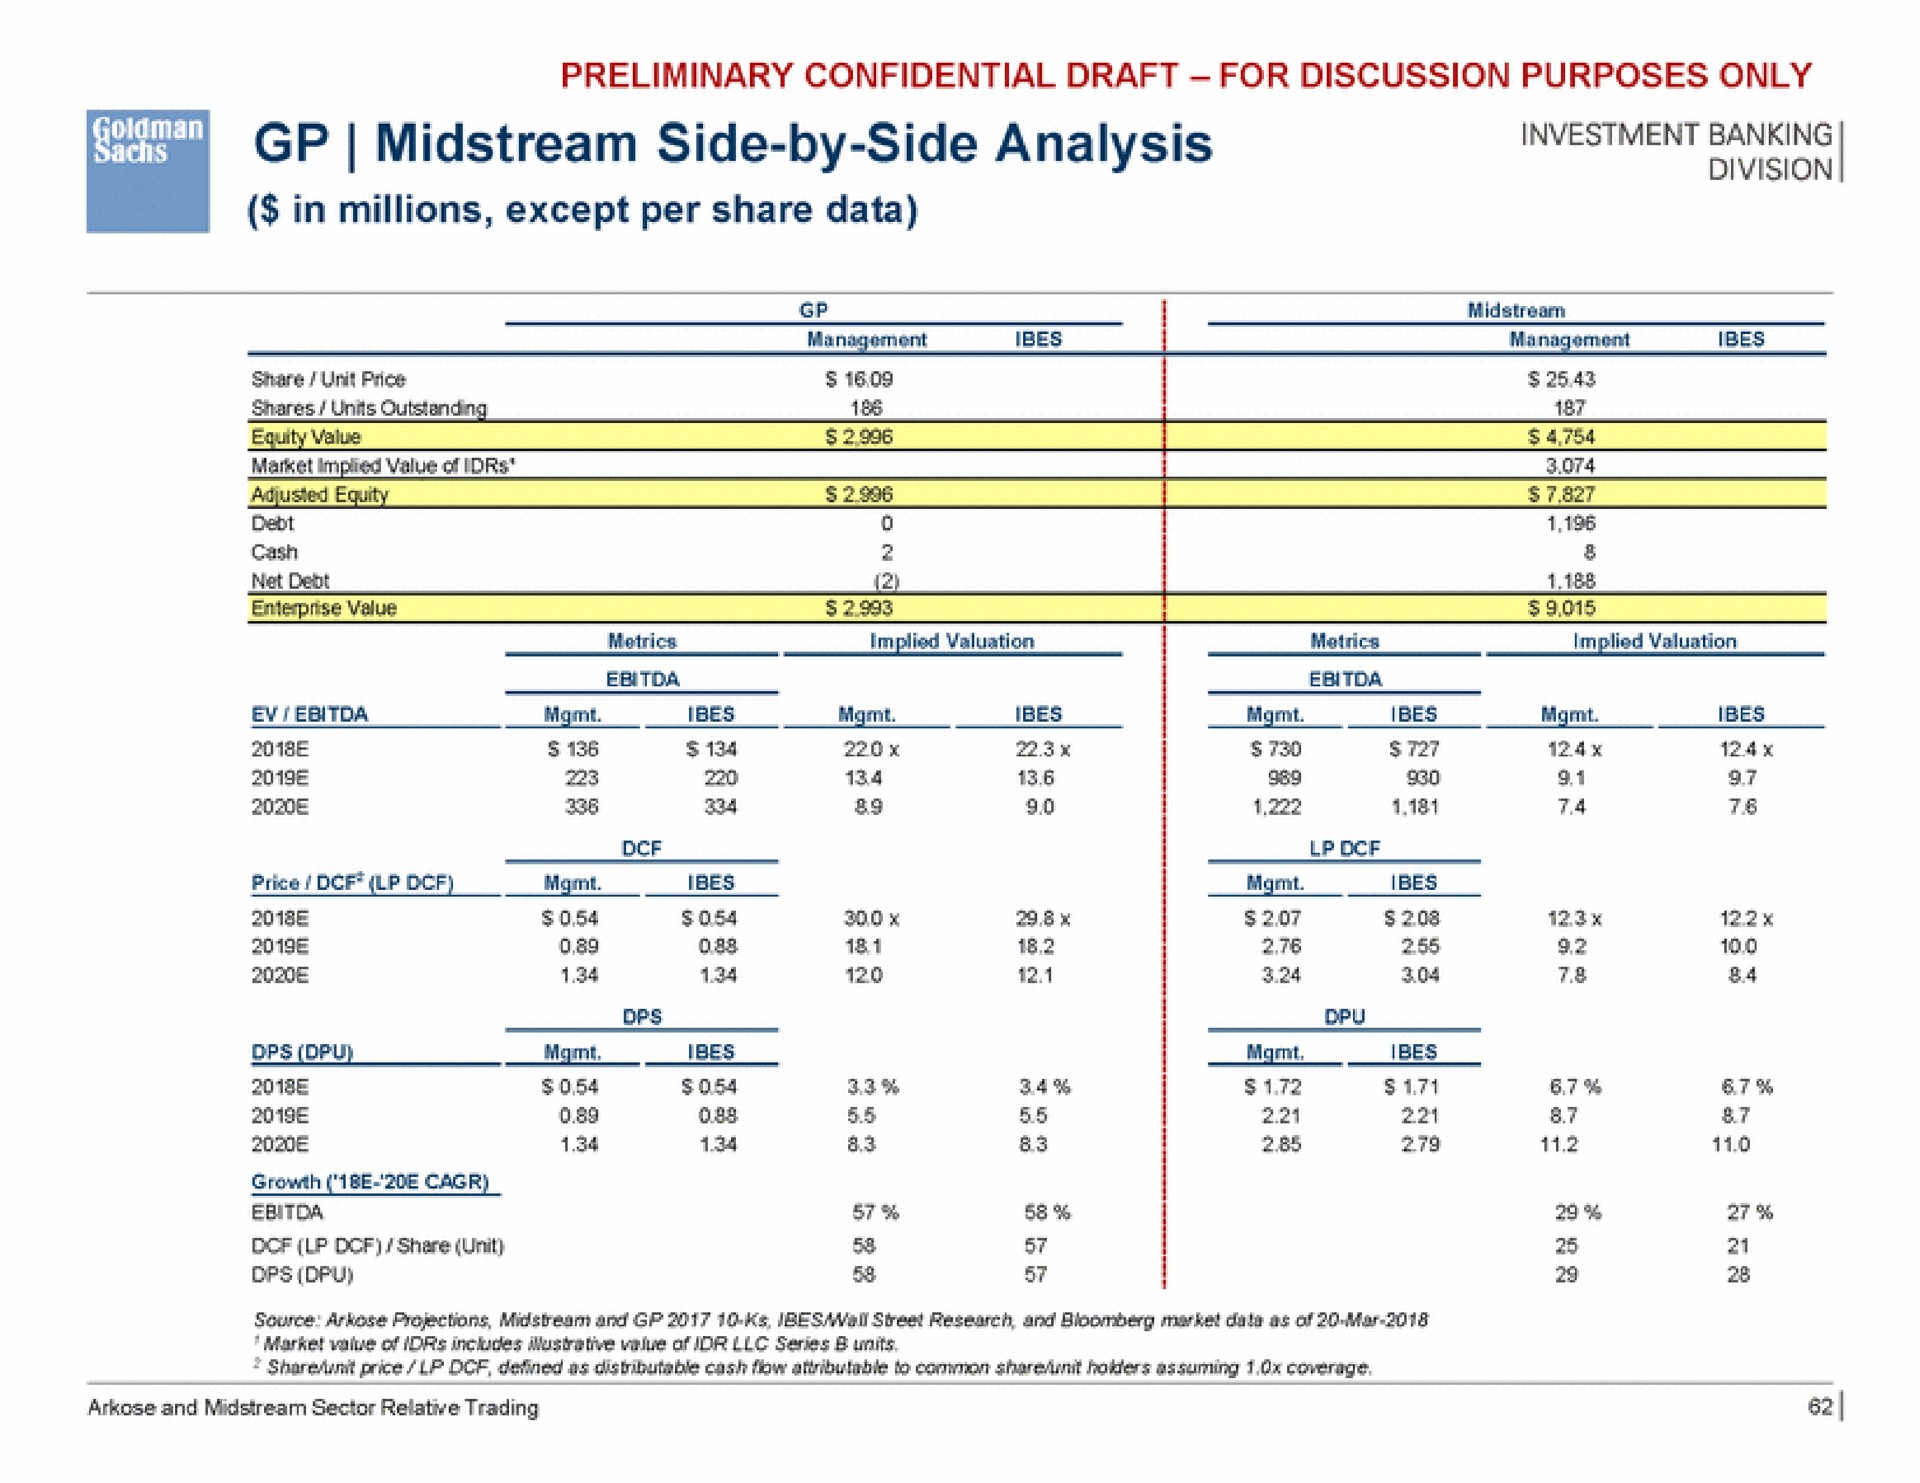 midstream side by side analysis investment banking | Goldman Sachs